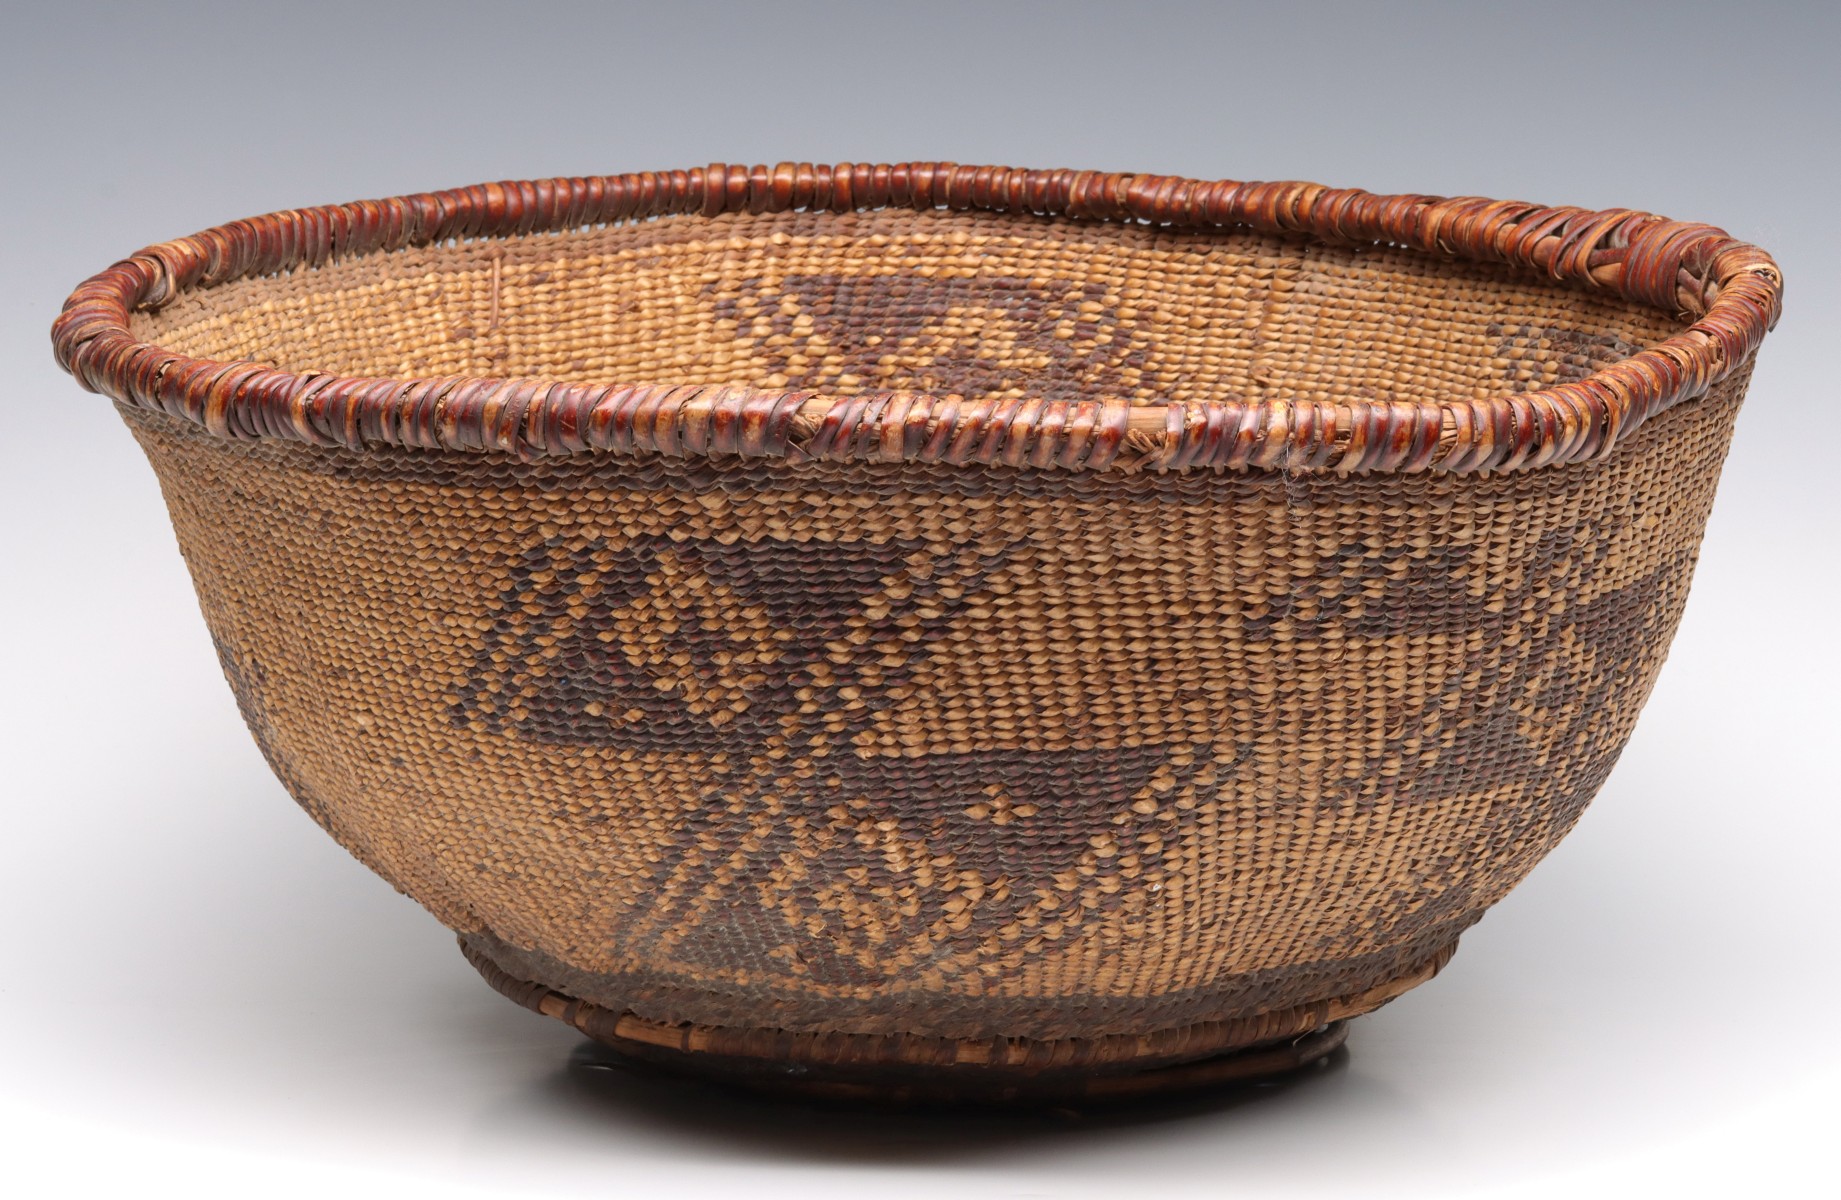 A LARGE YORUK BASKETRY BOWL 18 INCHES DIAMETER